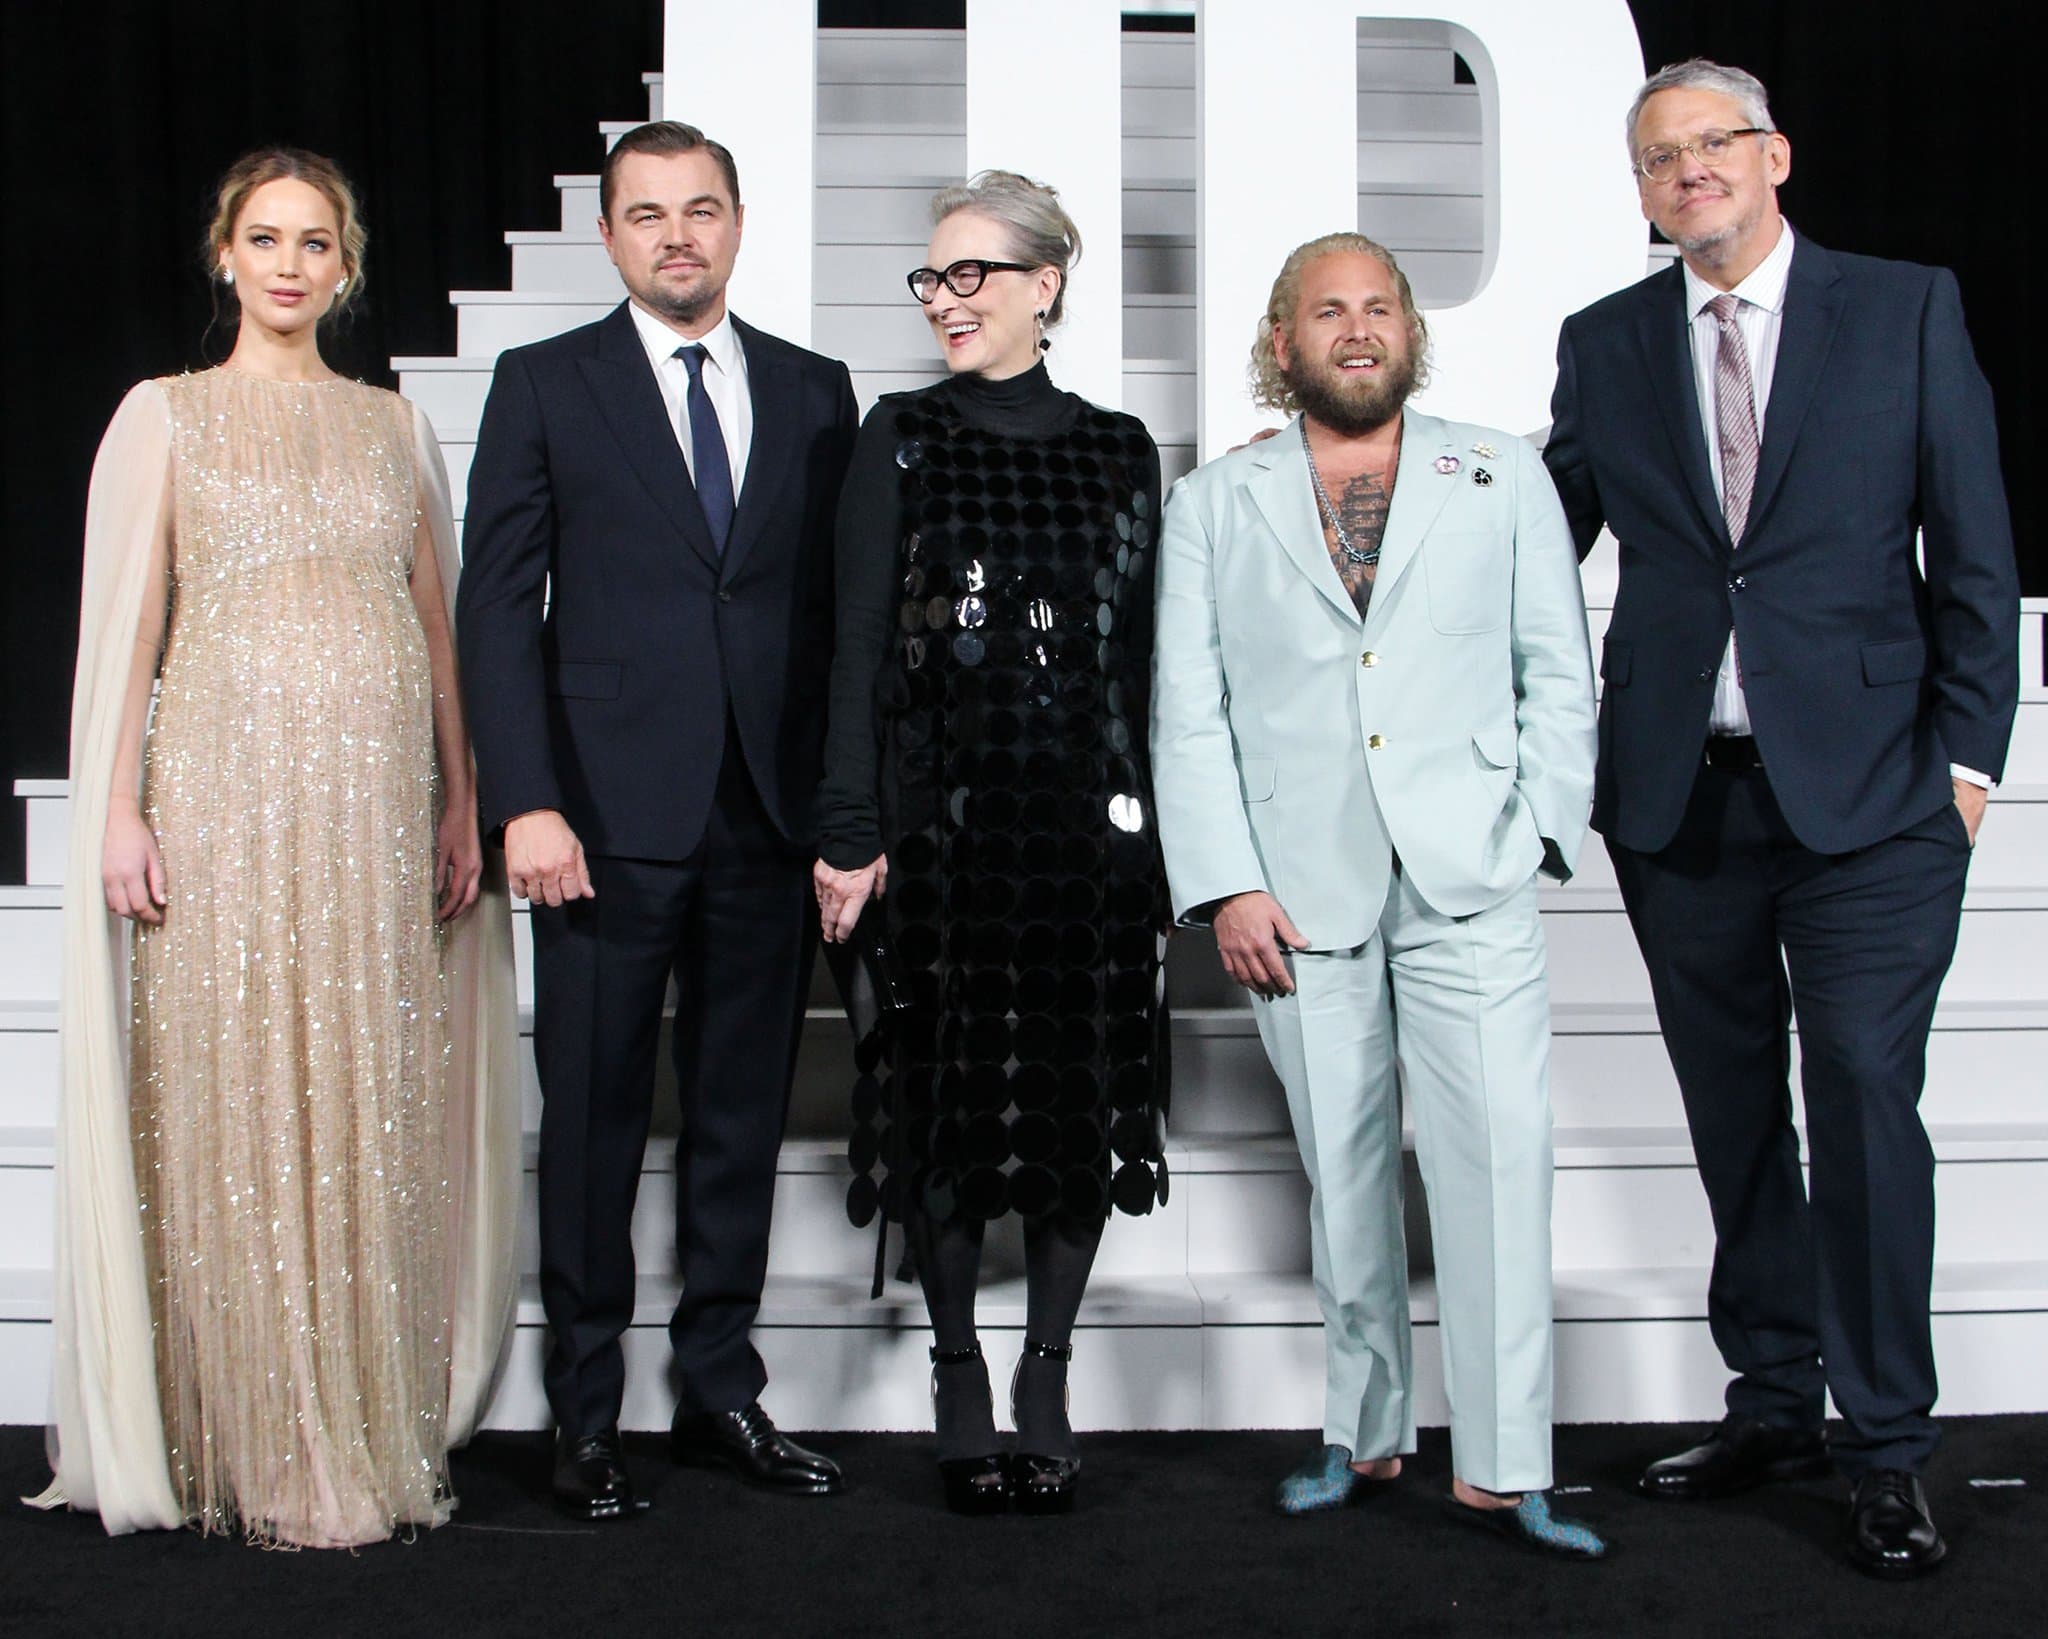 Jennifer Lawrence, Leonardo DiCaprio, Meryl Streep, Jonah Hill and director Adam McKay at the premiere of Don't Look Up held at Jazz at Lincoln Center on December 5, 2021